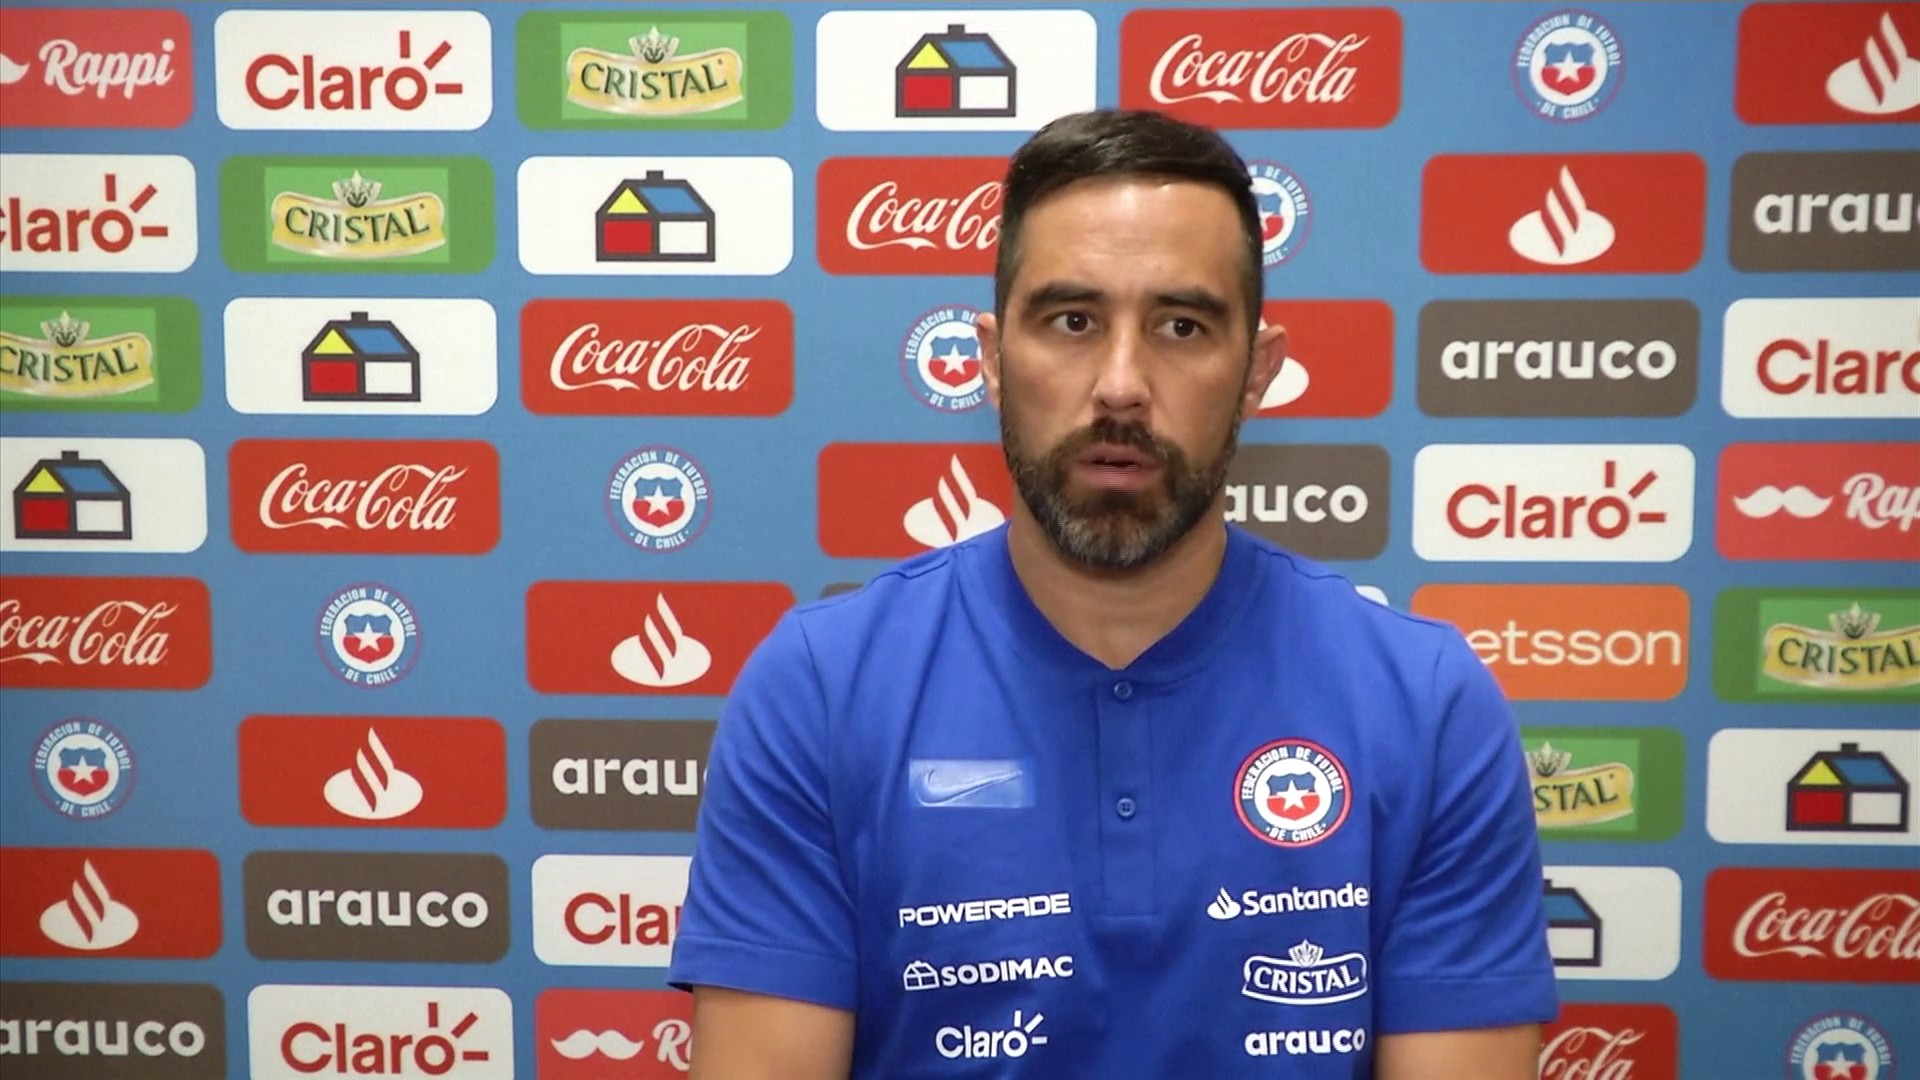 Claudio Bravo: "The whole team is working incredibly hard"